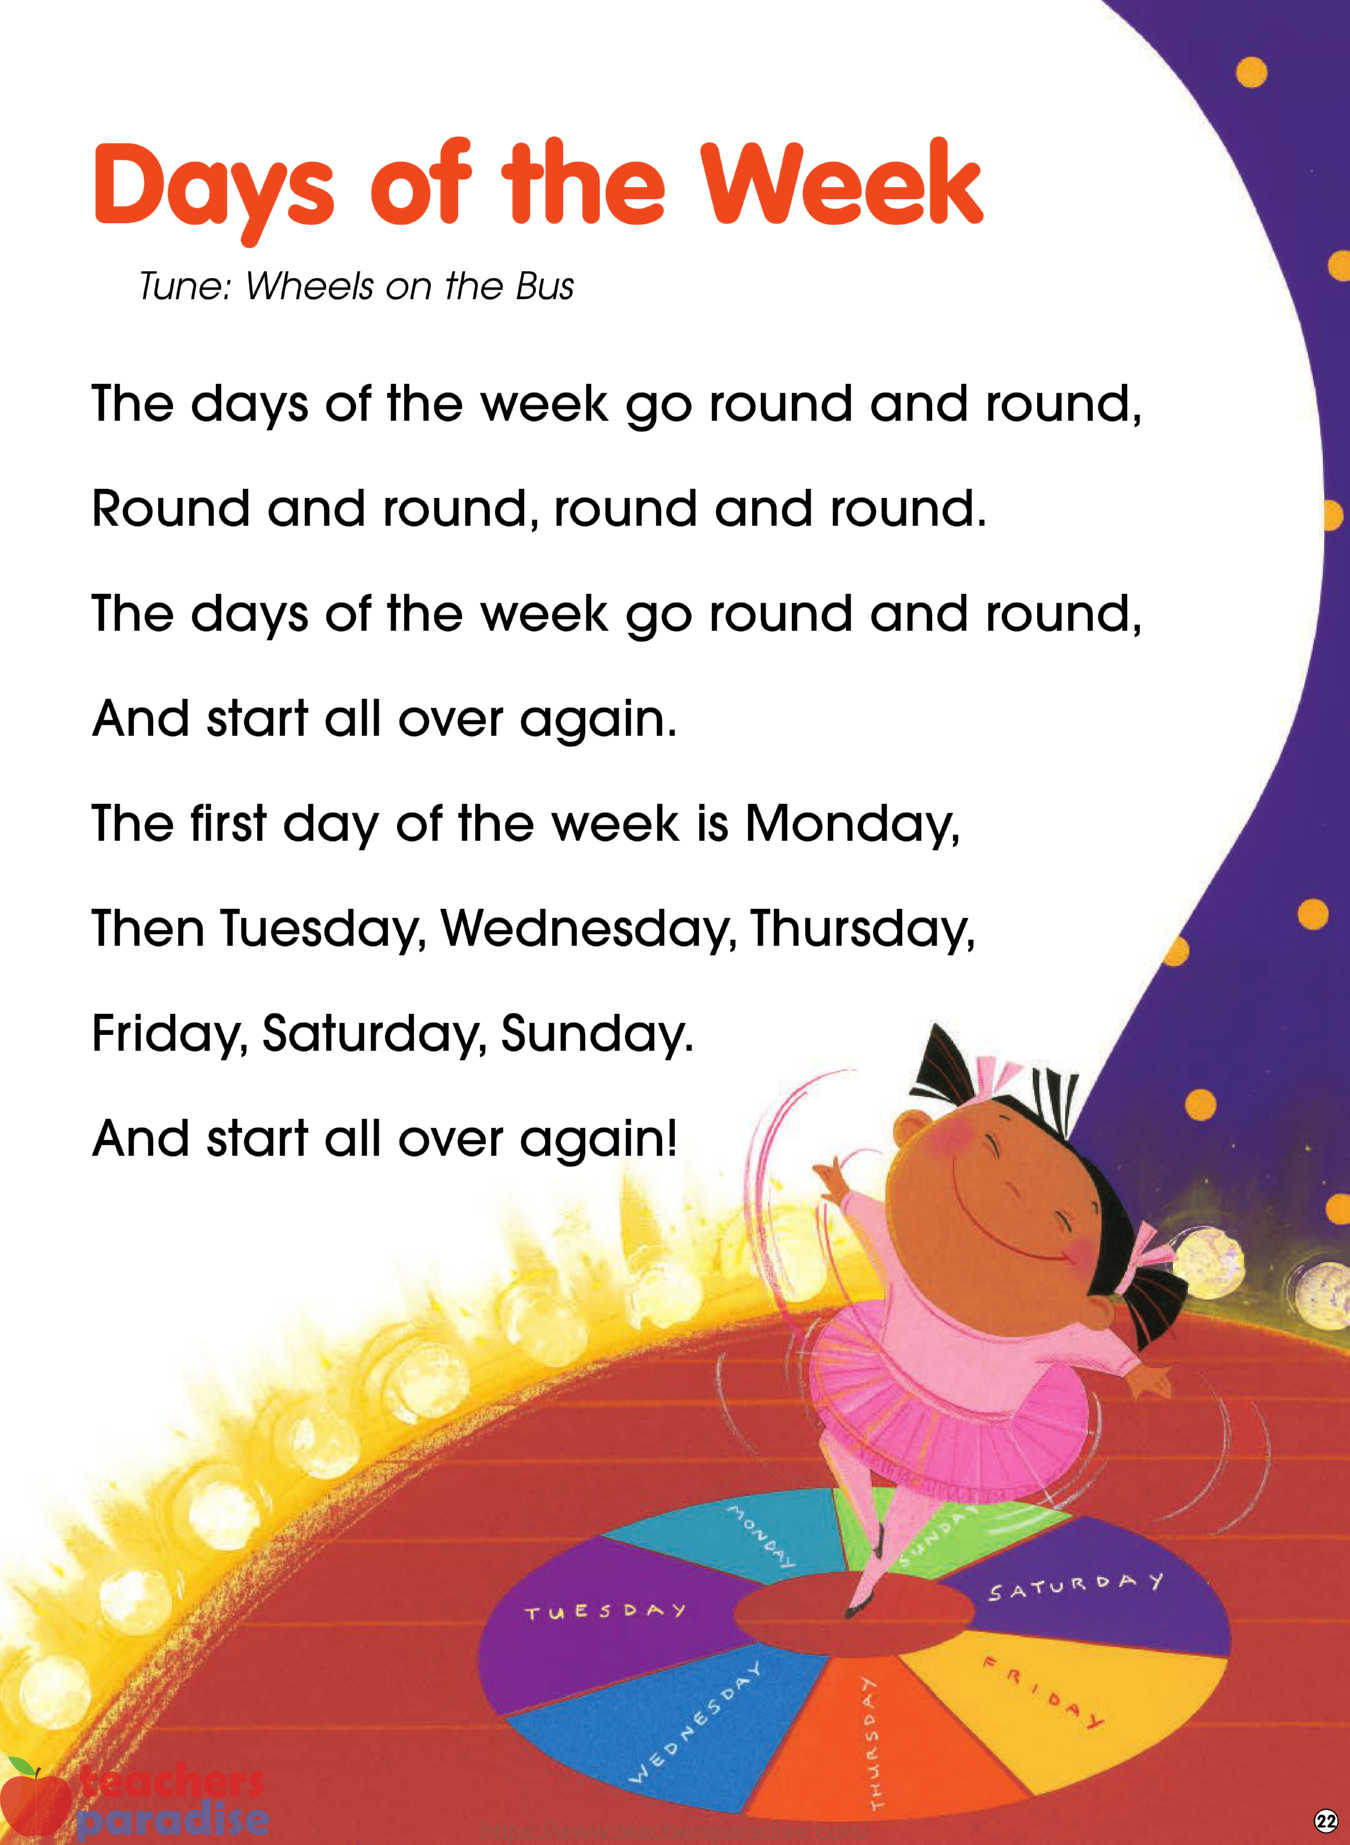 Days of the Week song to the tune of Wheels on the Bus Calendar Time